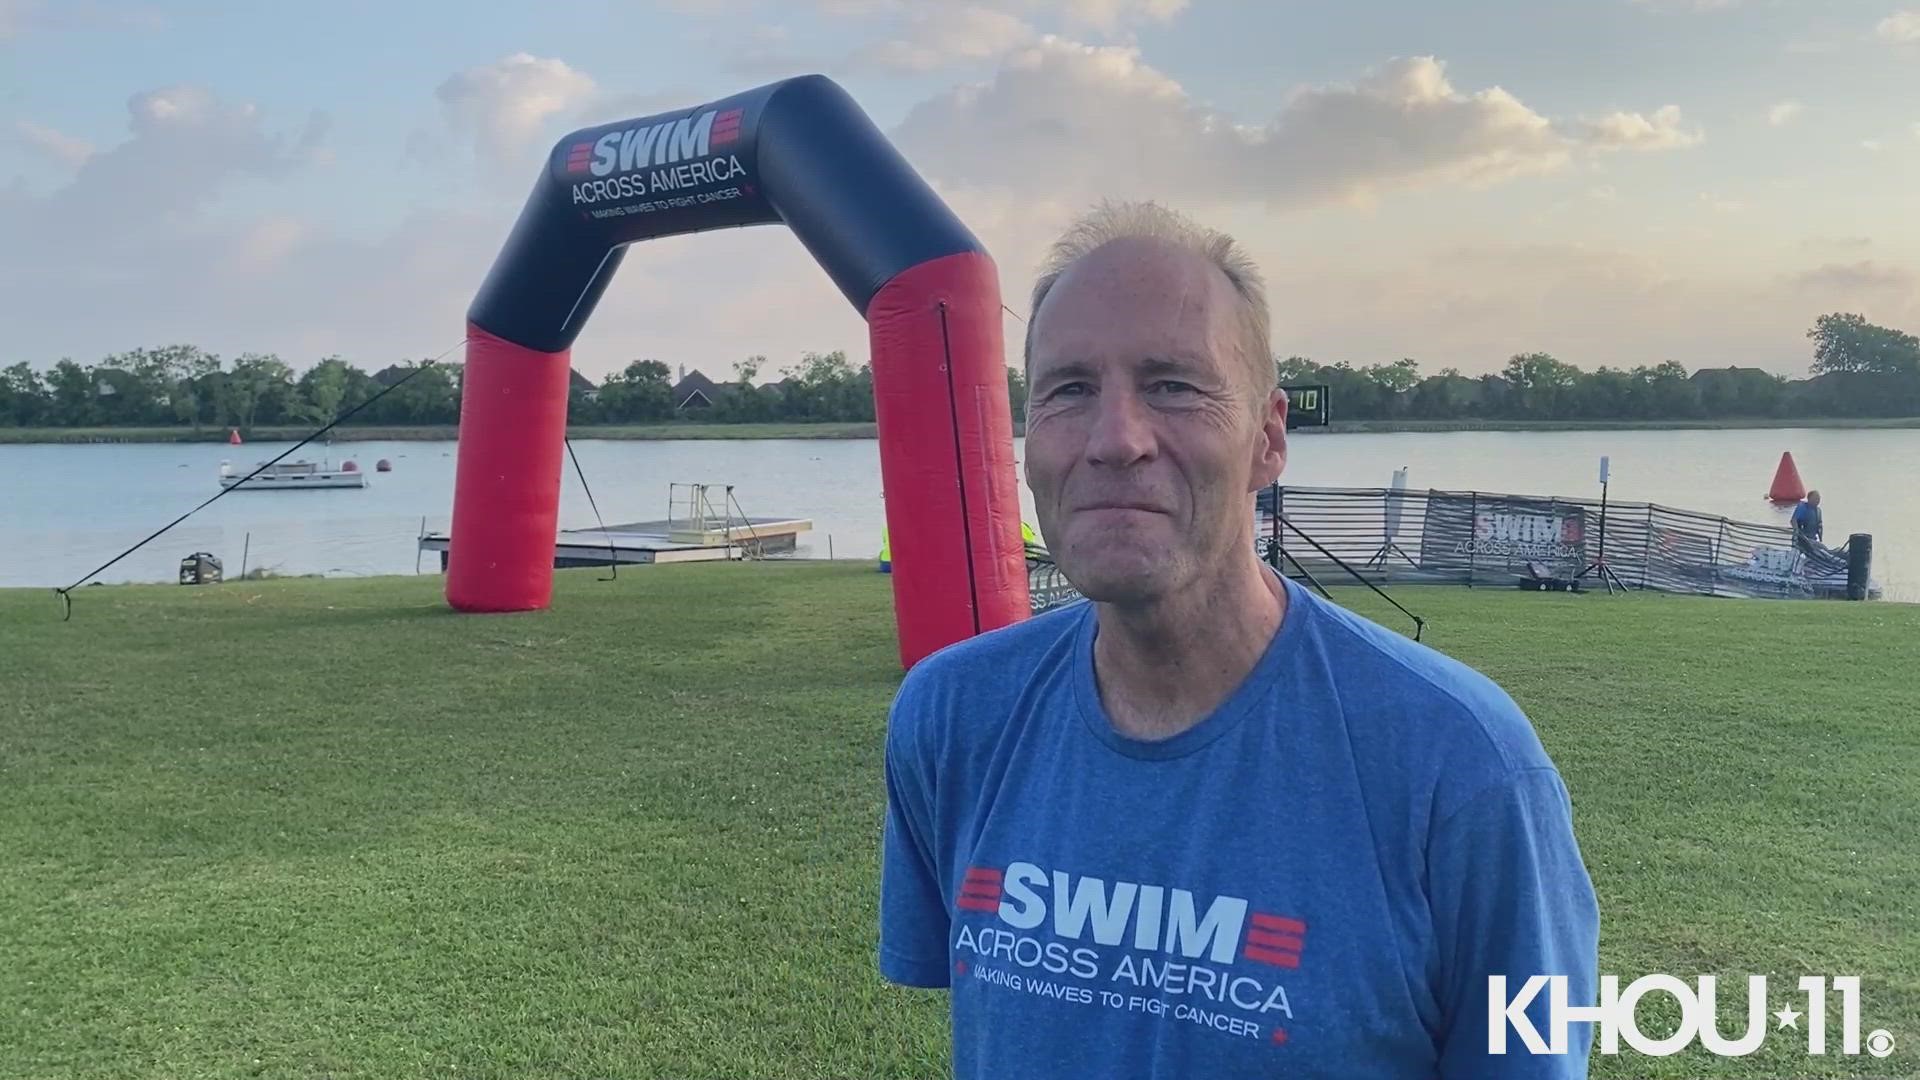 Robert McLaren plans to take part in all 24 of the nonprofit's open water swims.